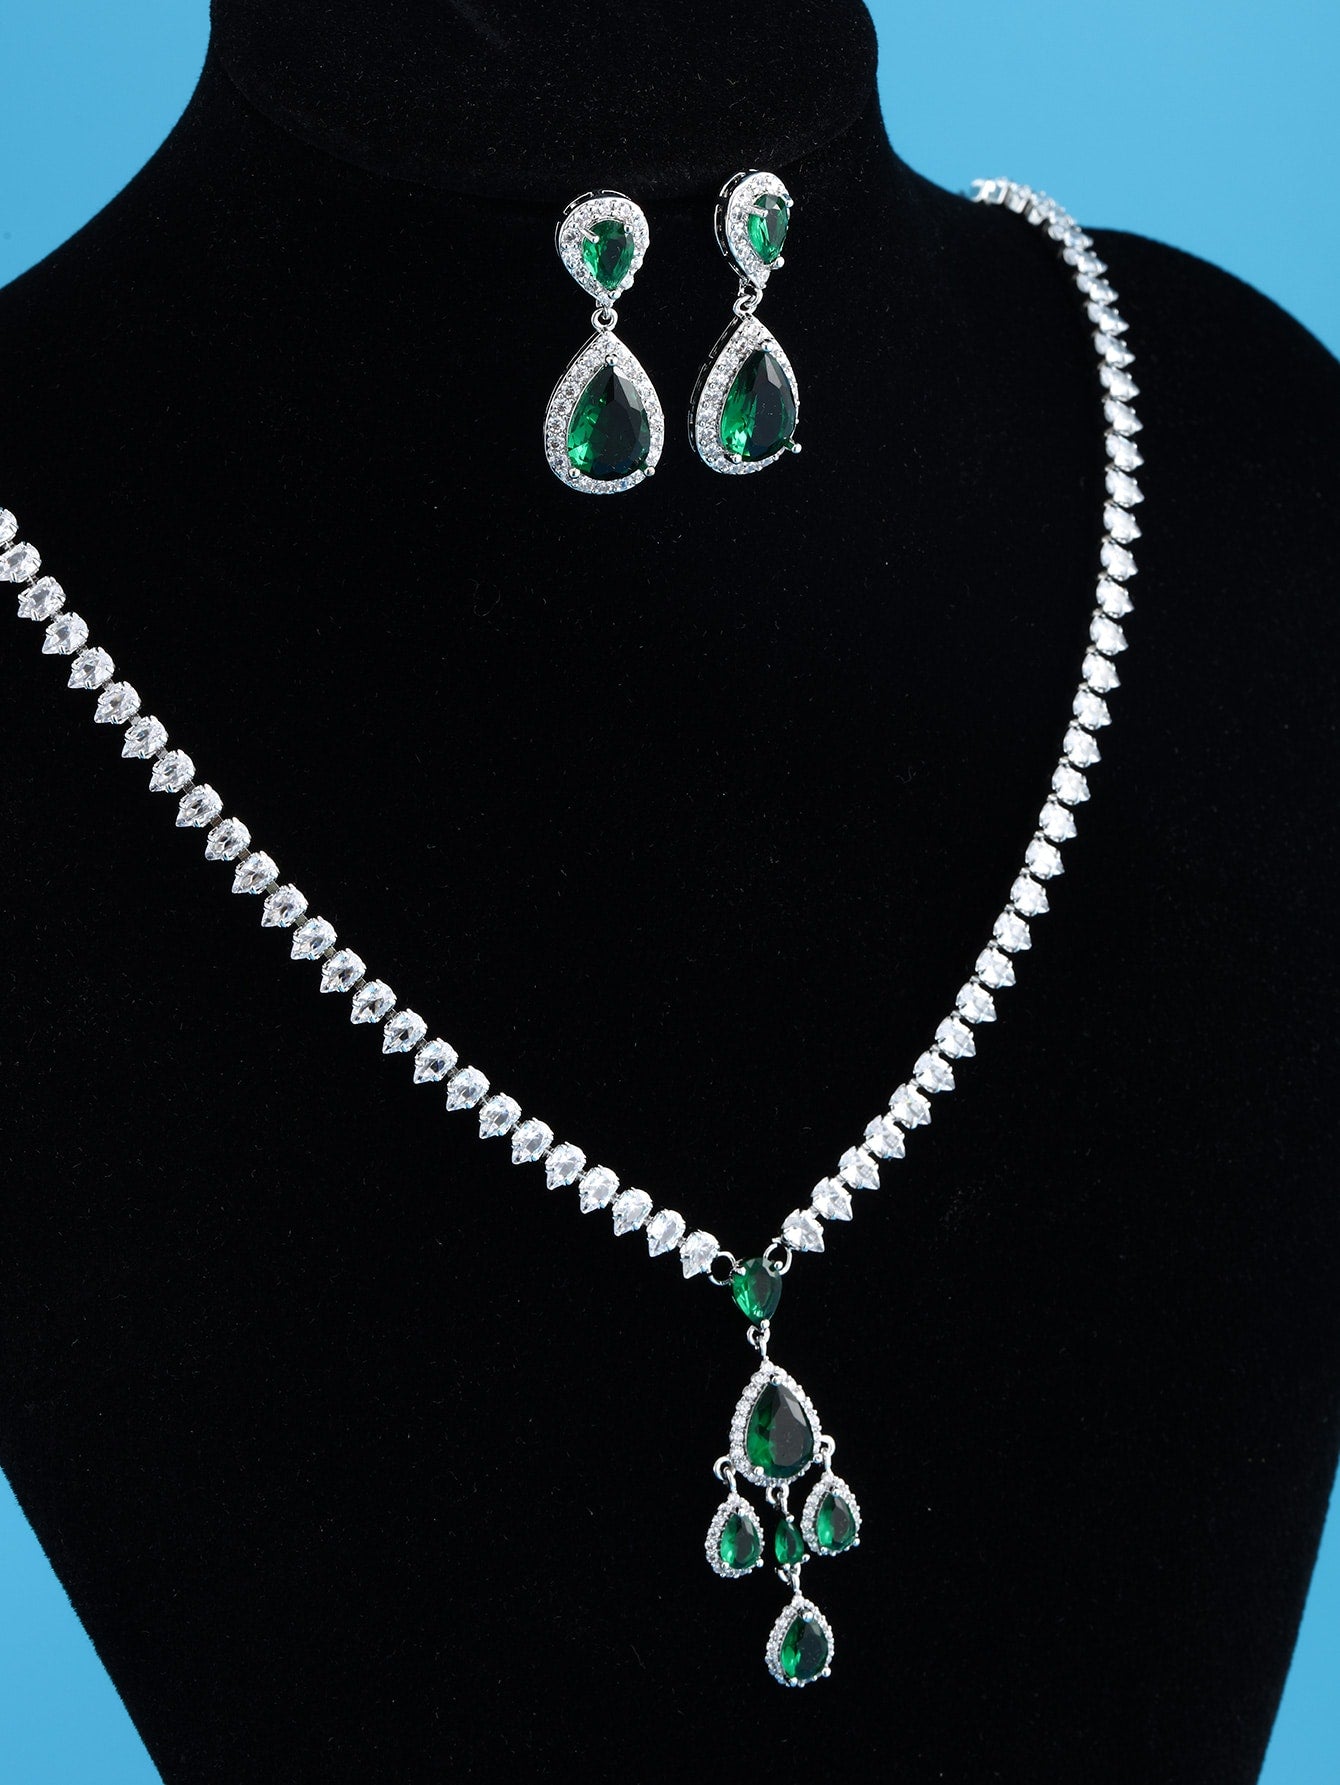 Stunning drop earrings & necklace set - JuVons